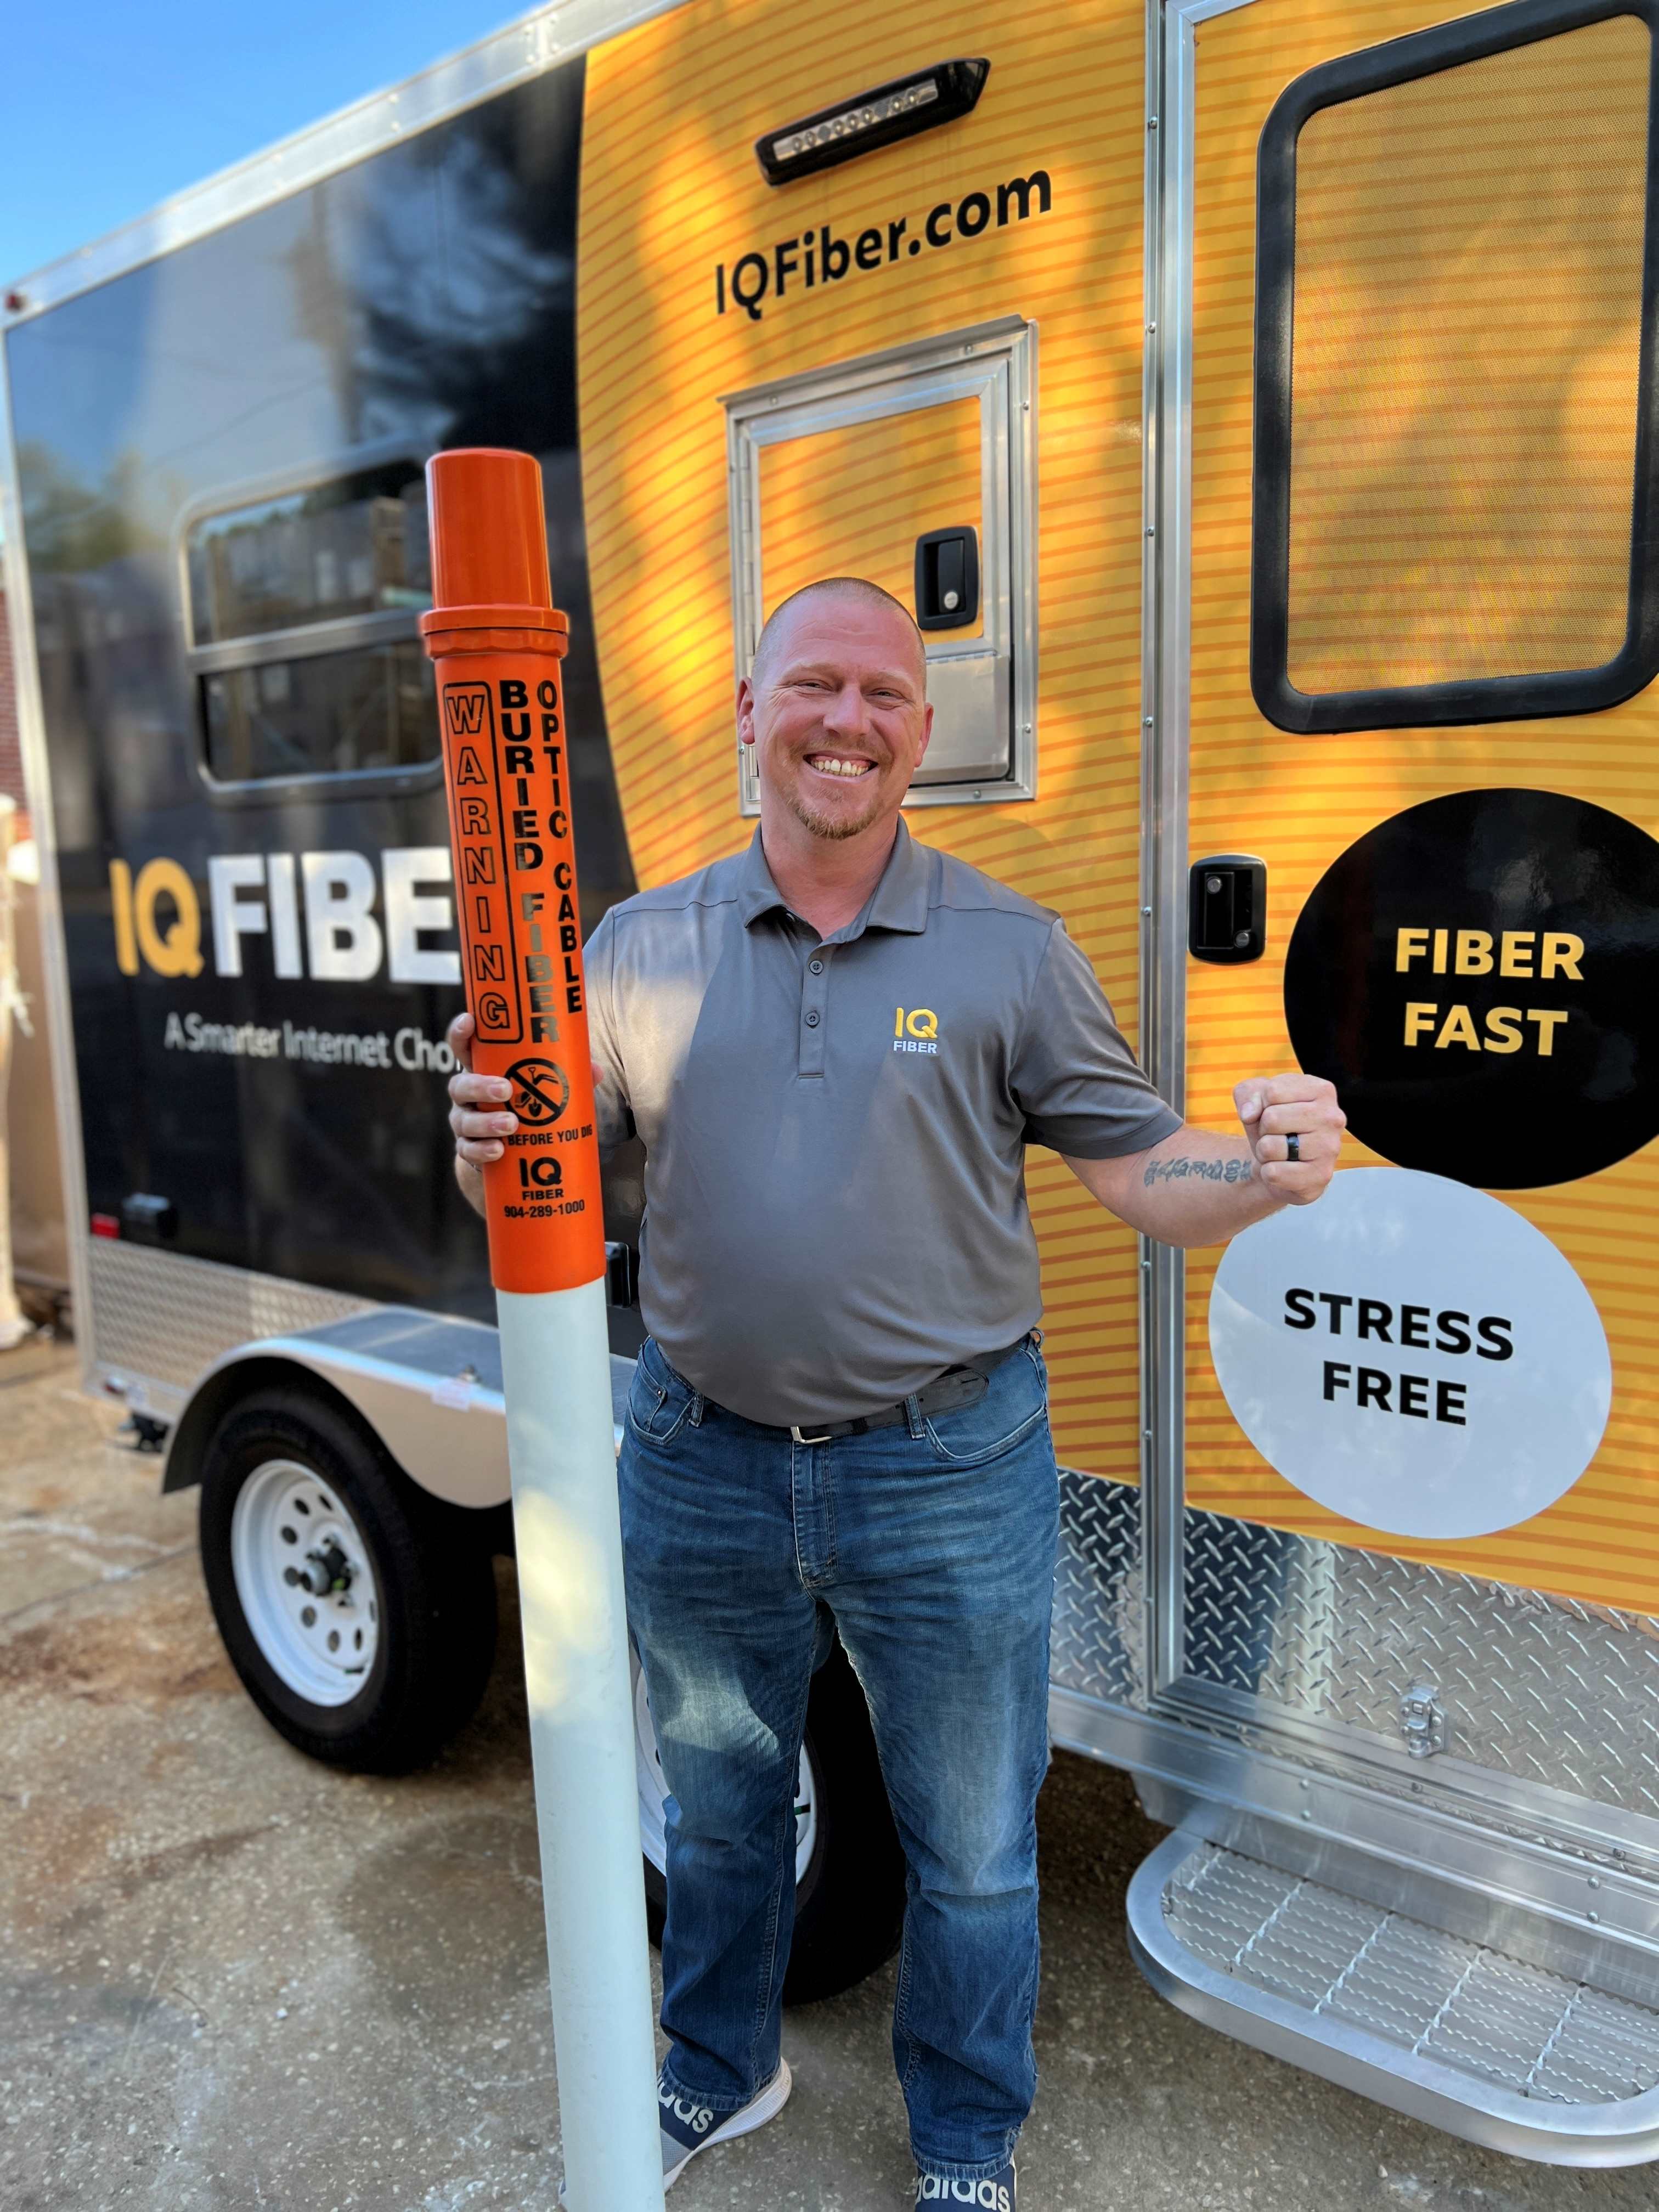 IQ Fiber's 100% fiber-optic internet network is the fastest, most reliable and most responsive internet in Jacksonville.